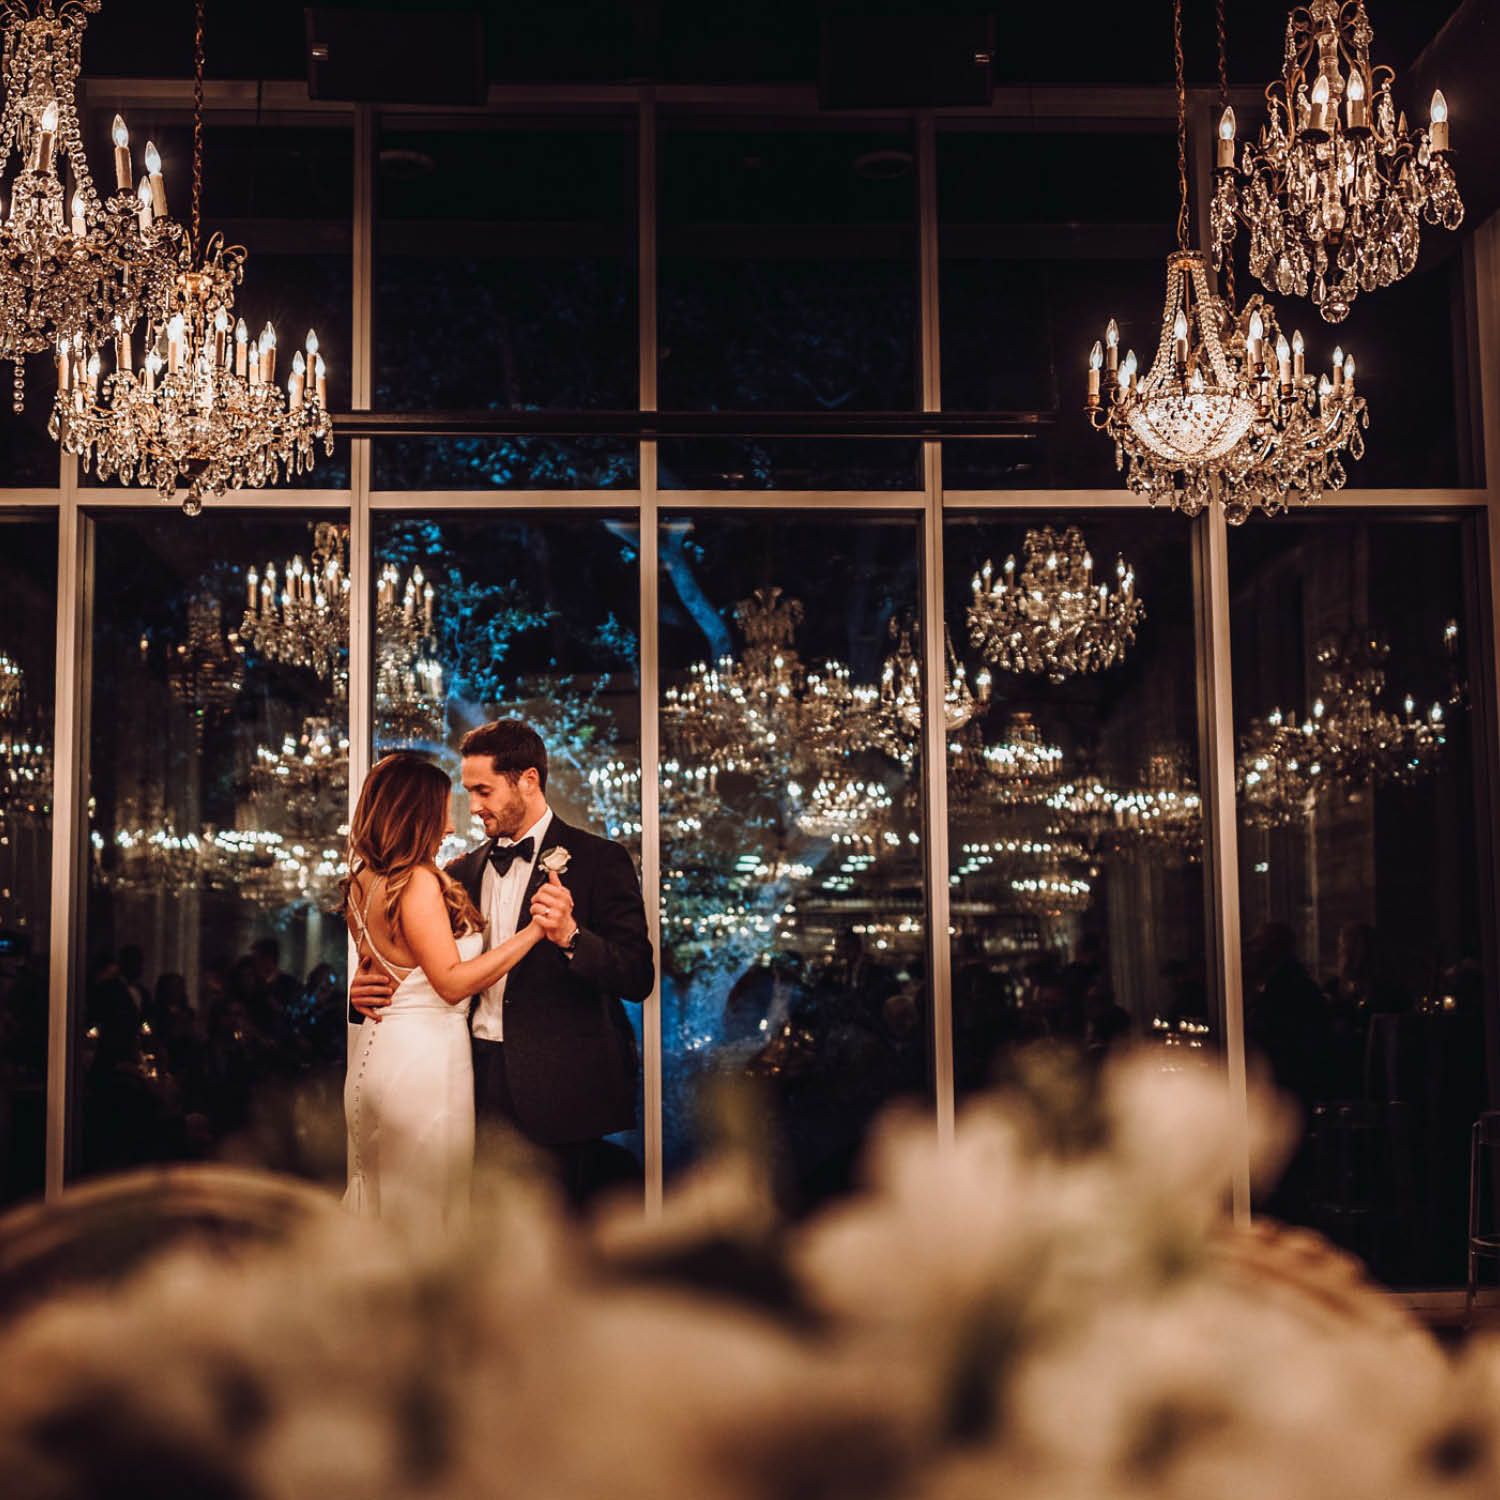 The newly minted Almquists savor a romantic and intimate “last dance” amid the chandeliers at the end of their reception.